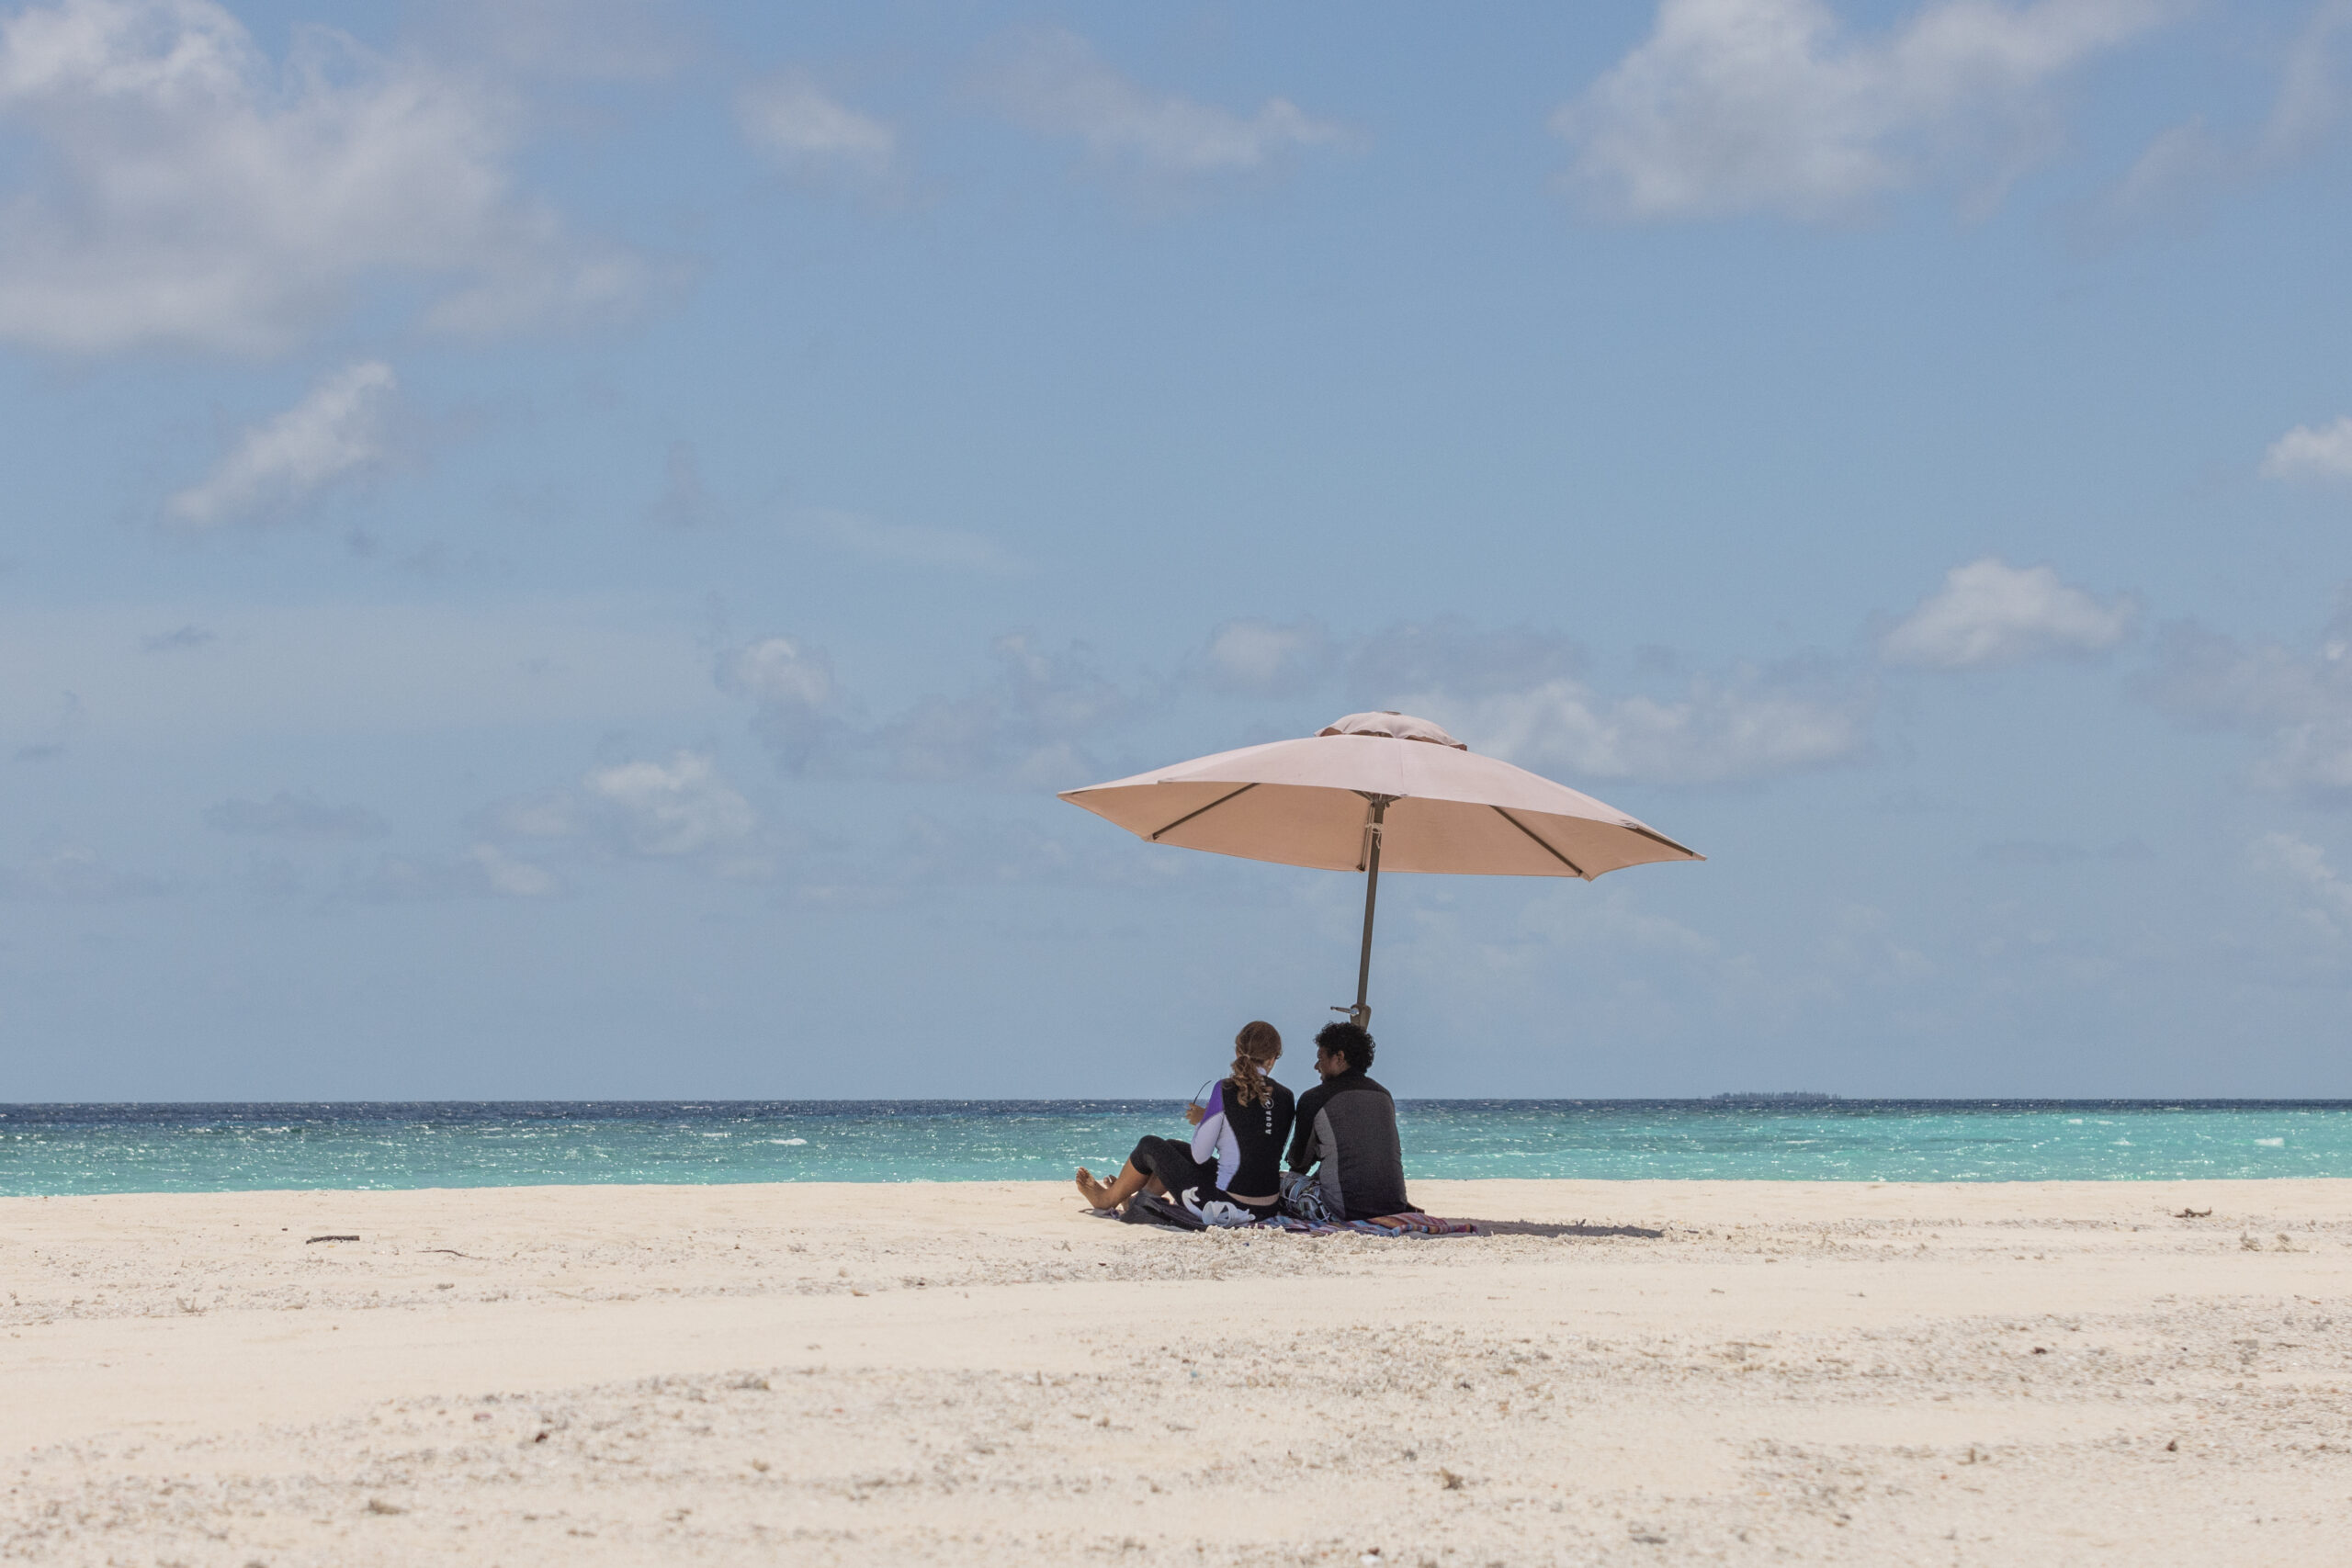 Two people on a white sandy Maldivian beach, under an umbrella in the sun.